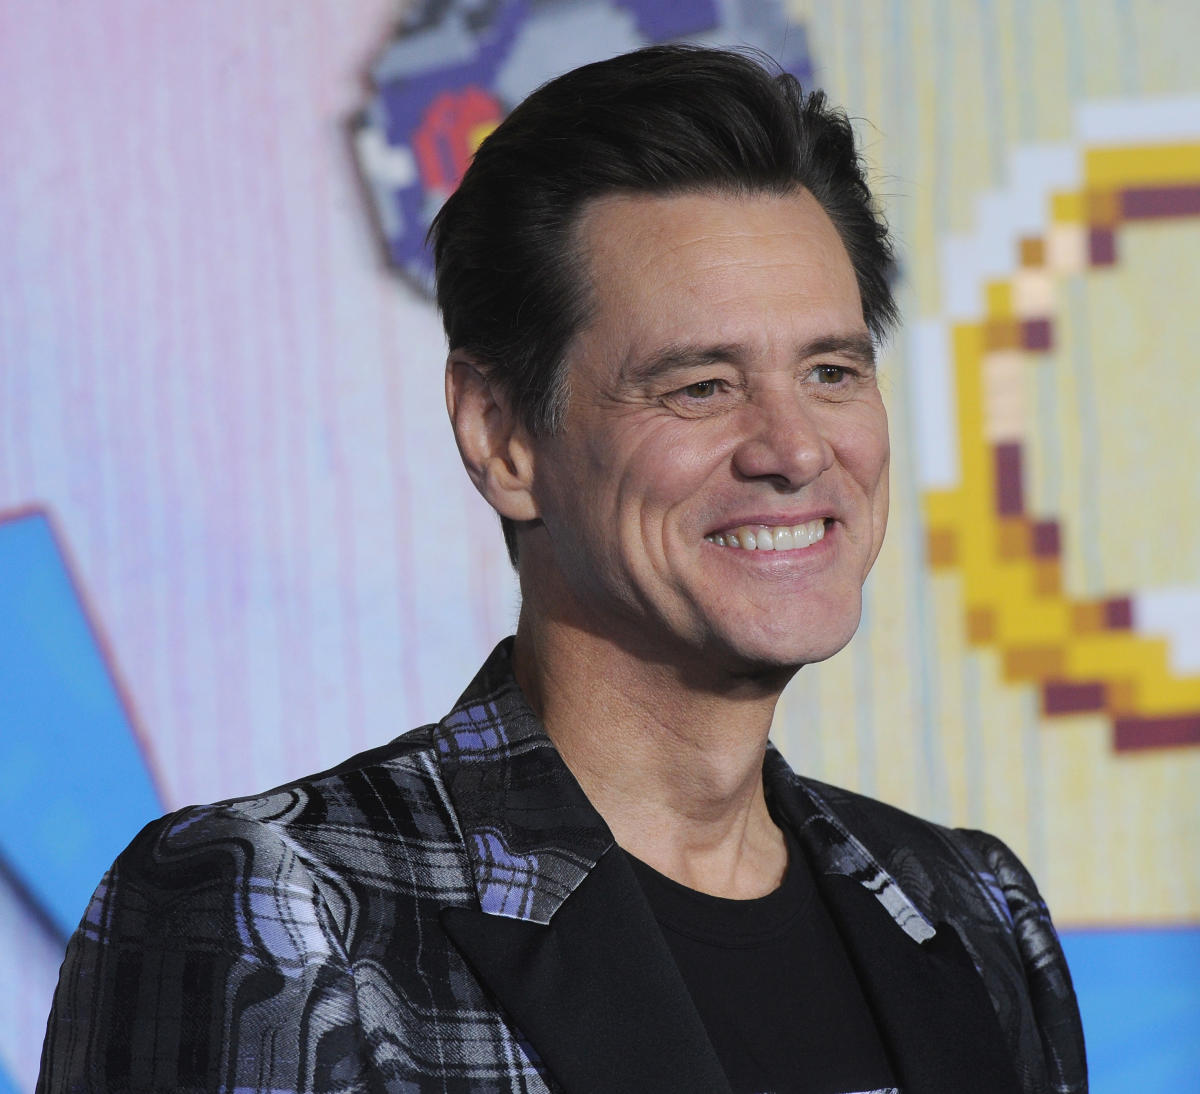 Jim Carrey responds to backlash over exchange with female reporter